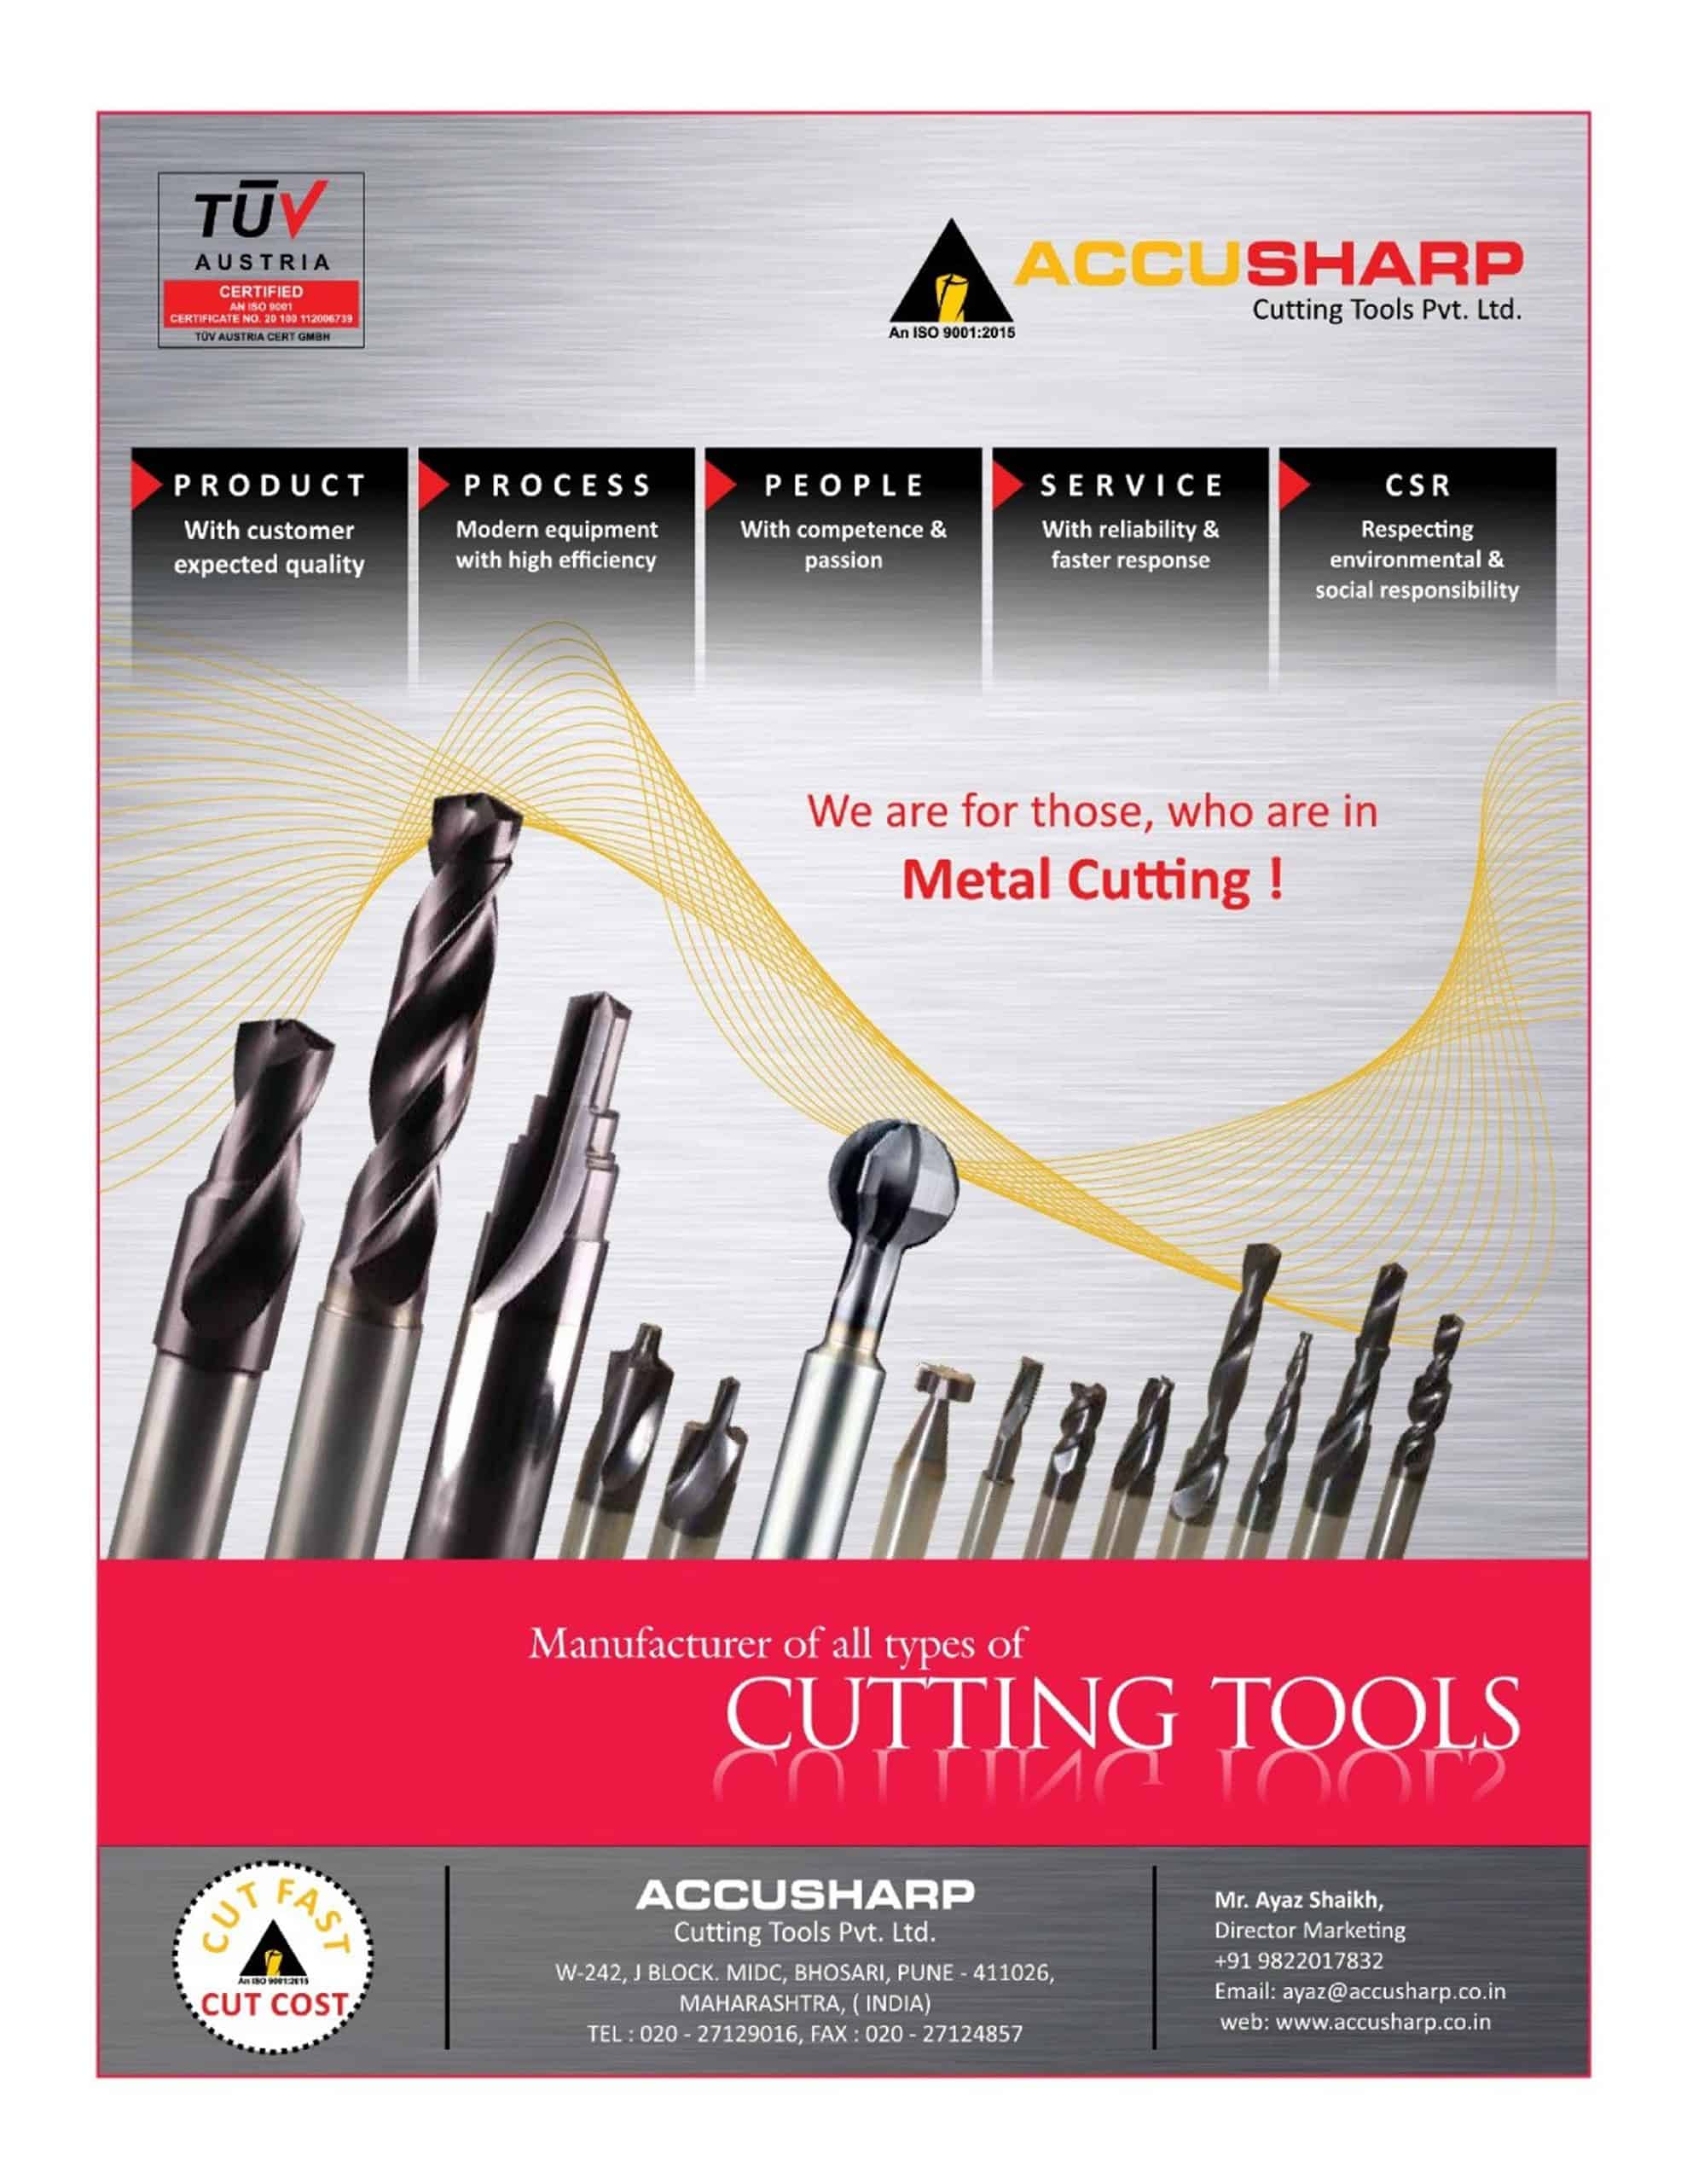 Manufacturer of all types of Cutting Tools